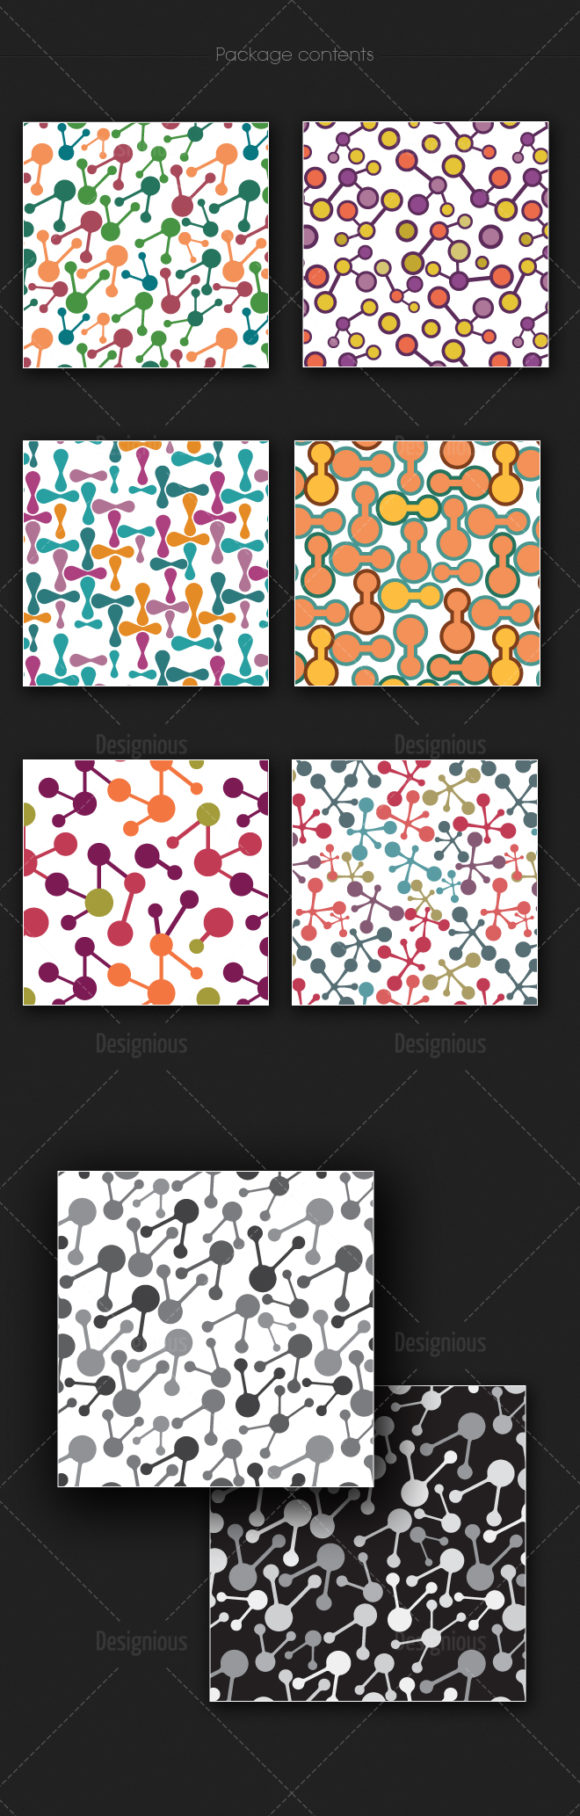 Seamless Patterns Vector Pack 168 2